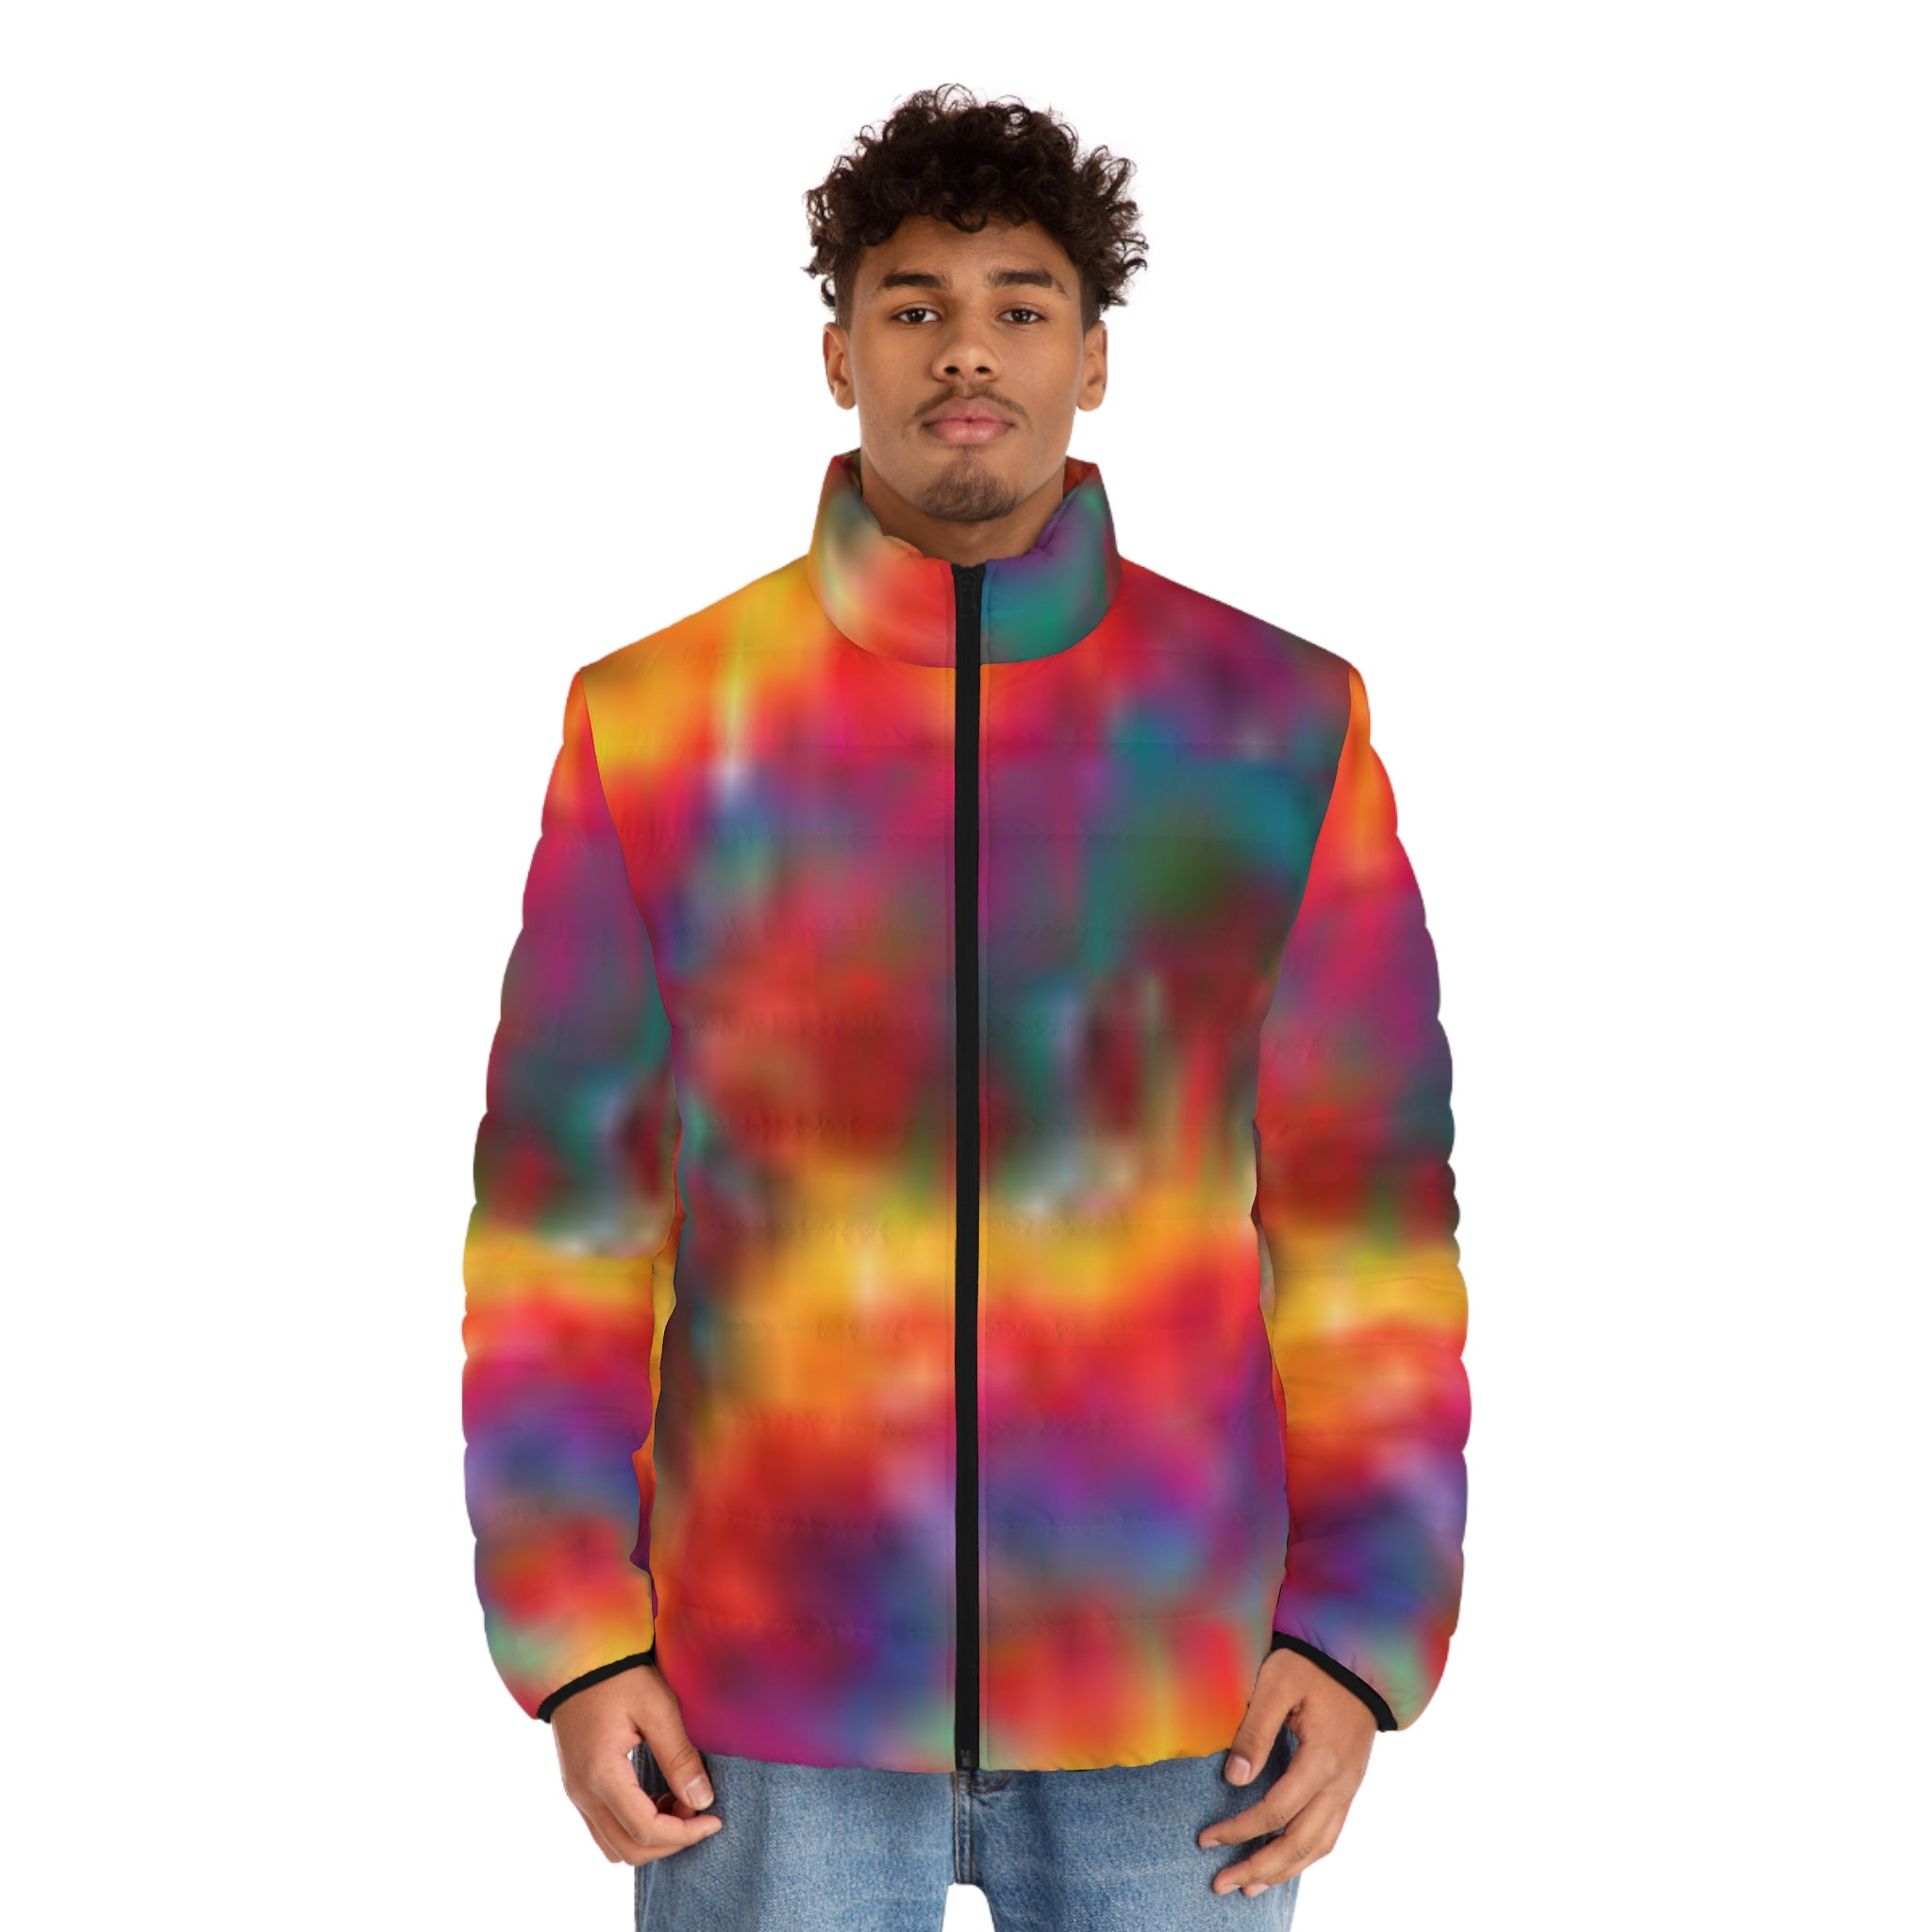 men's puffer jacket in tie-dye colors of blue, green, red, yellow and orange 